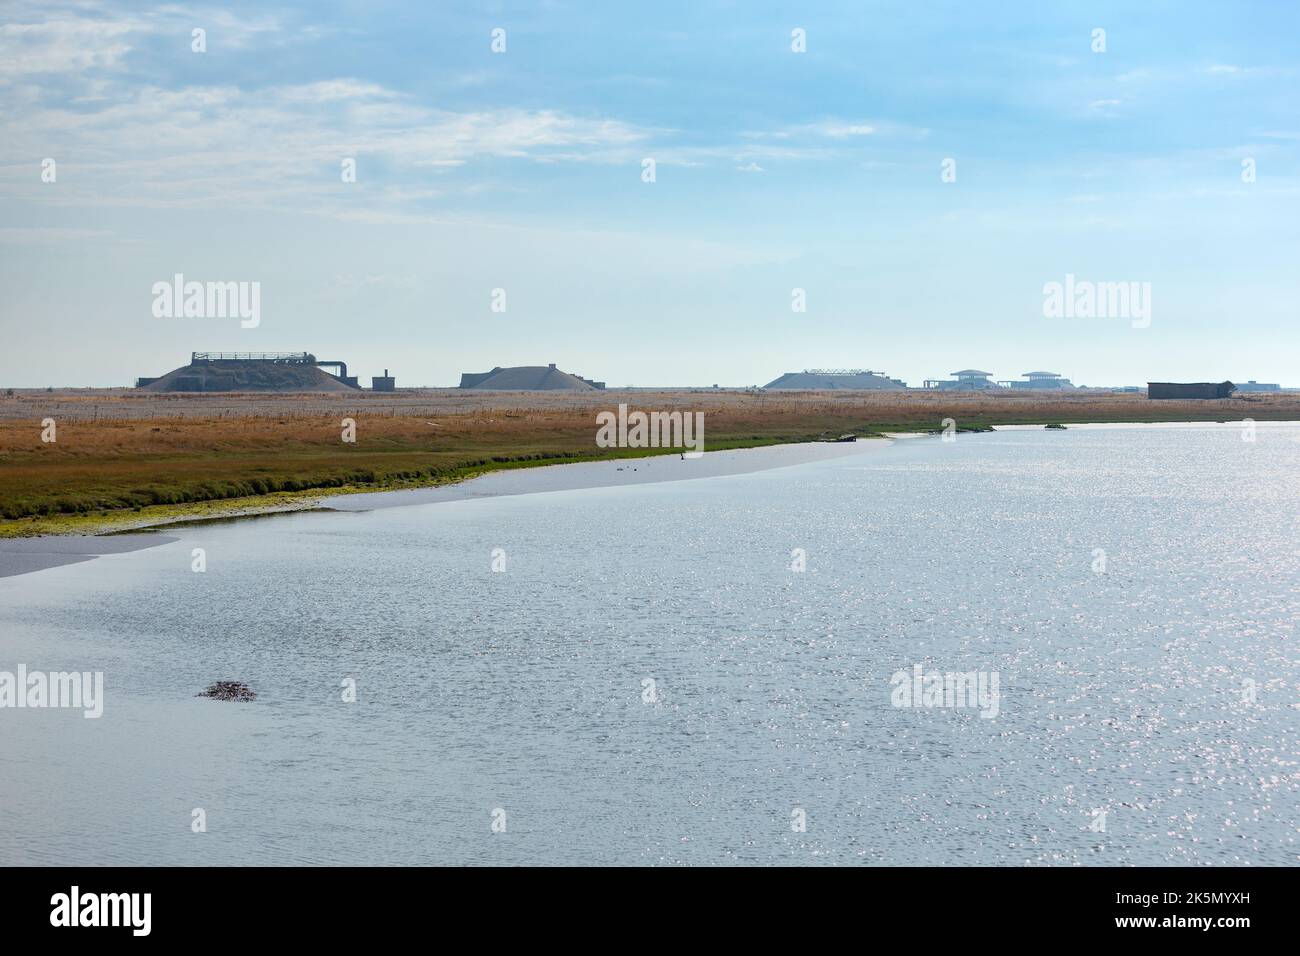 Watery landscape with former atomic weapons research testing laboratories in line on the horizon, Orford Ness, Suffolk Stock Photo